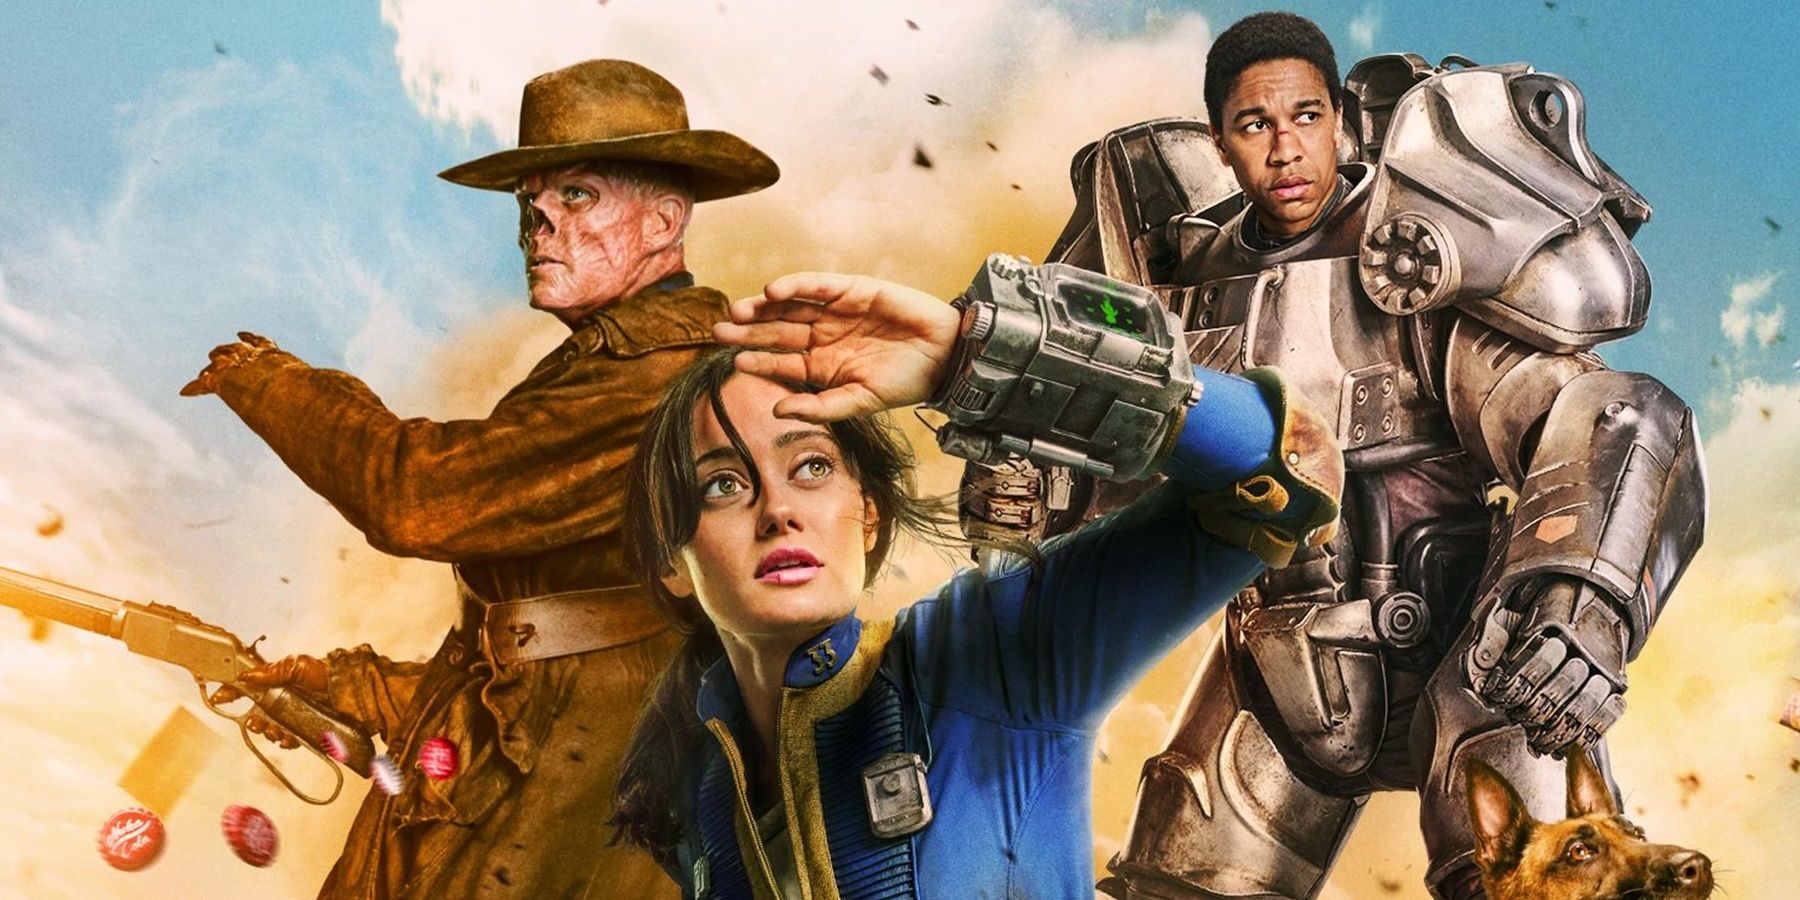 The poster for Fallout on prime video with Lucy, Maximus and The Ghould.